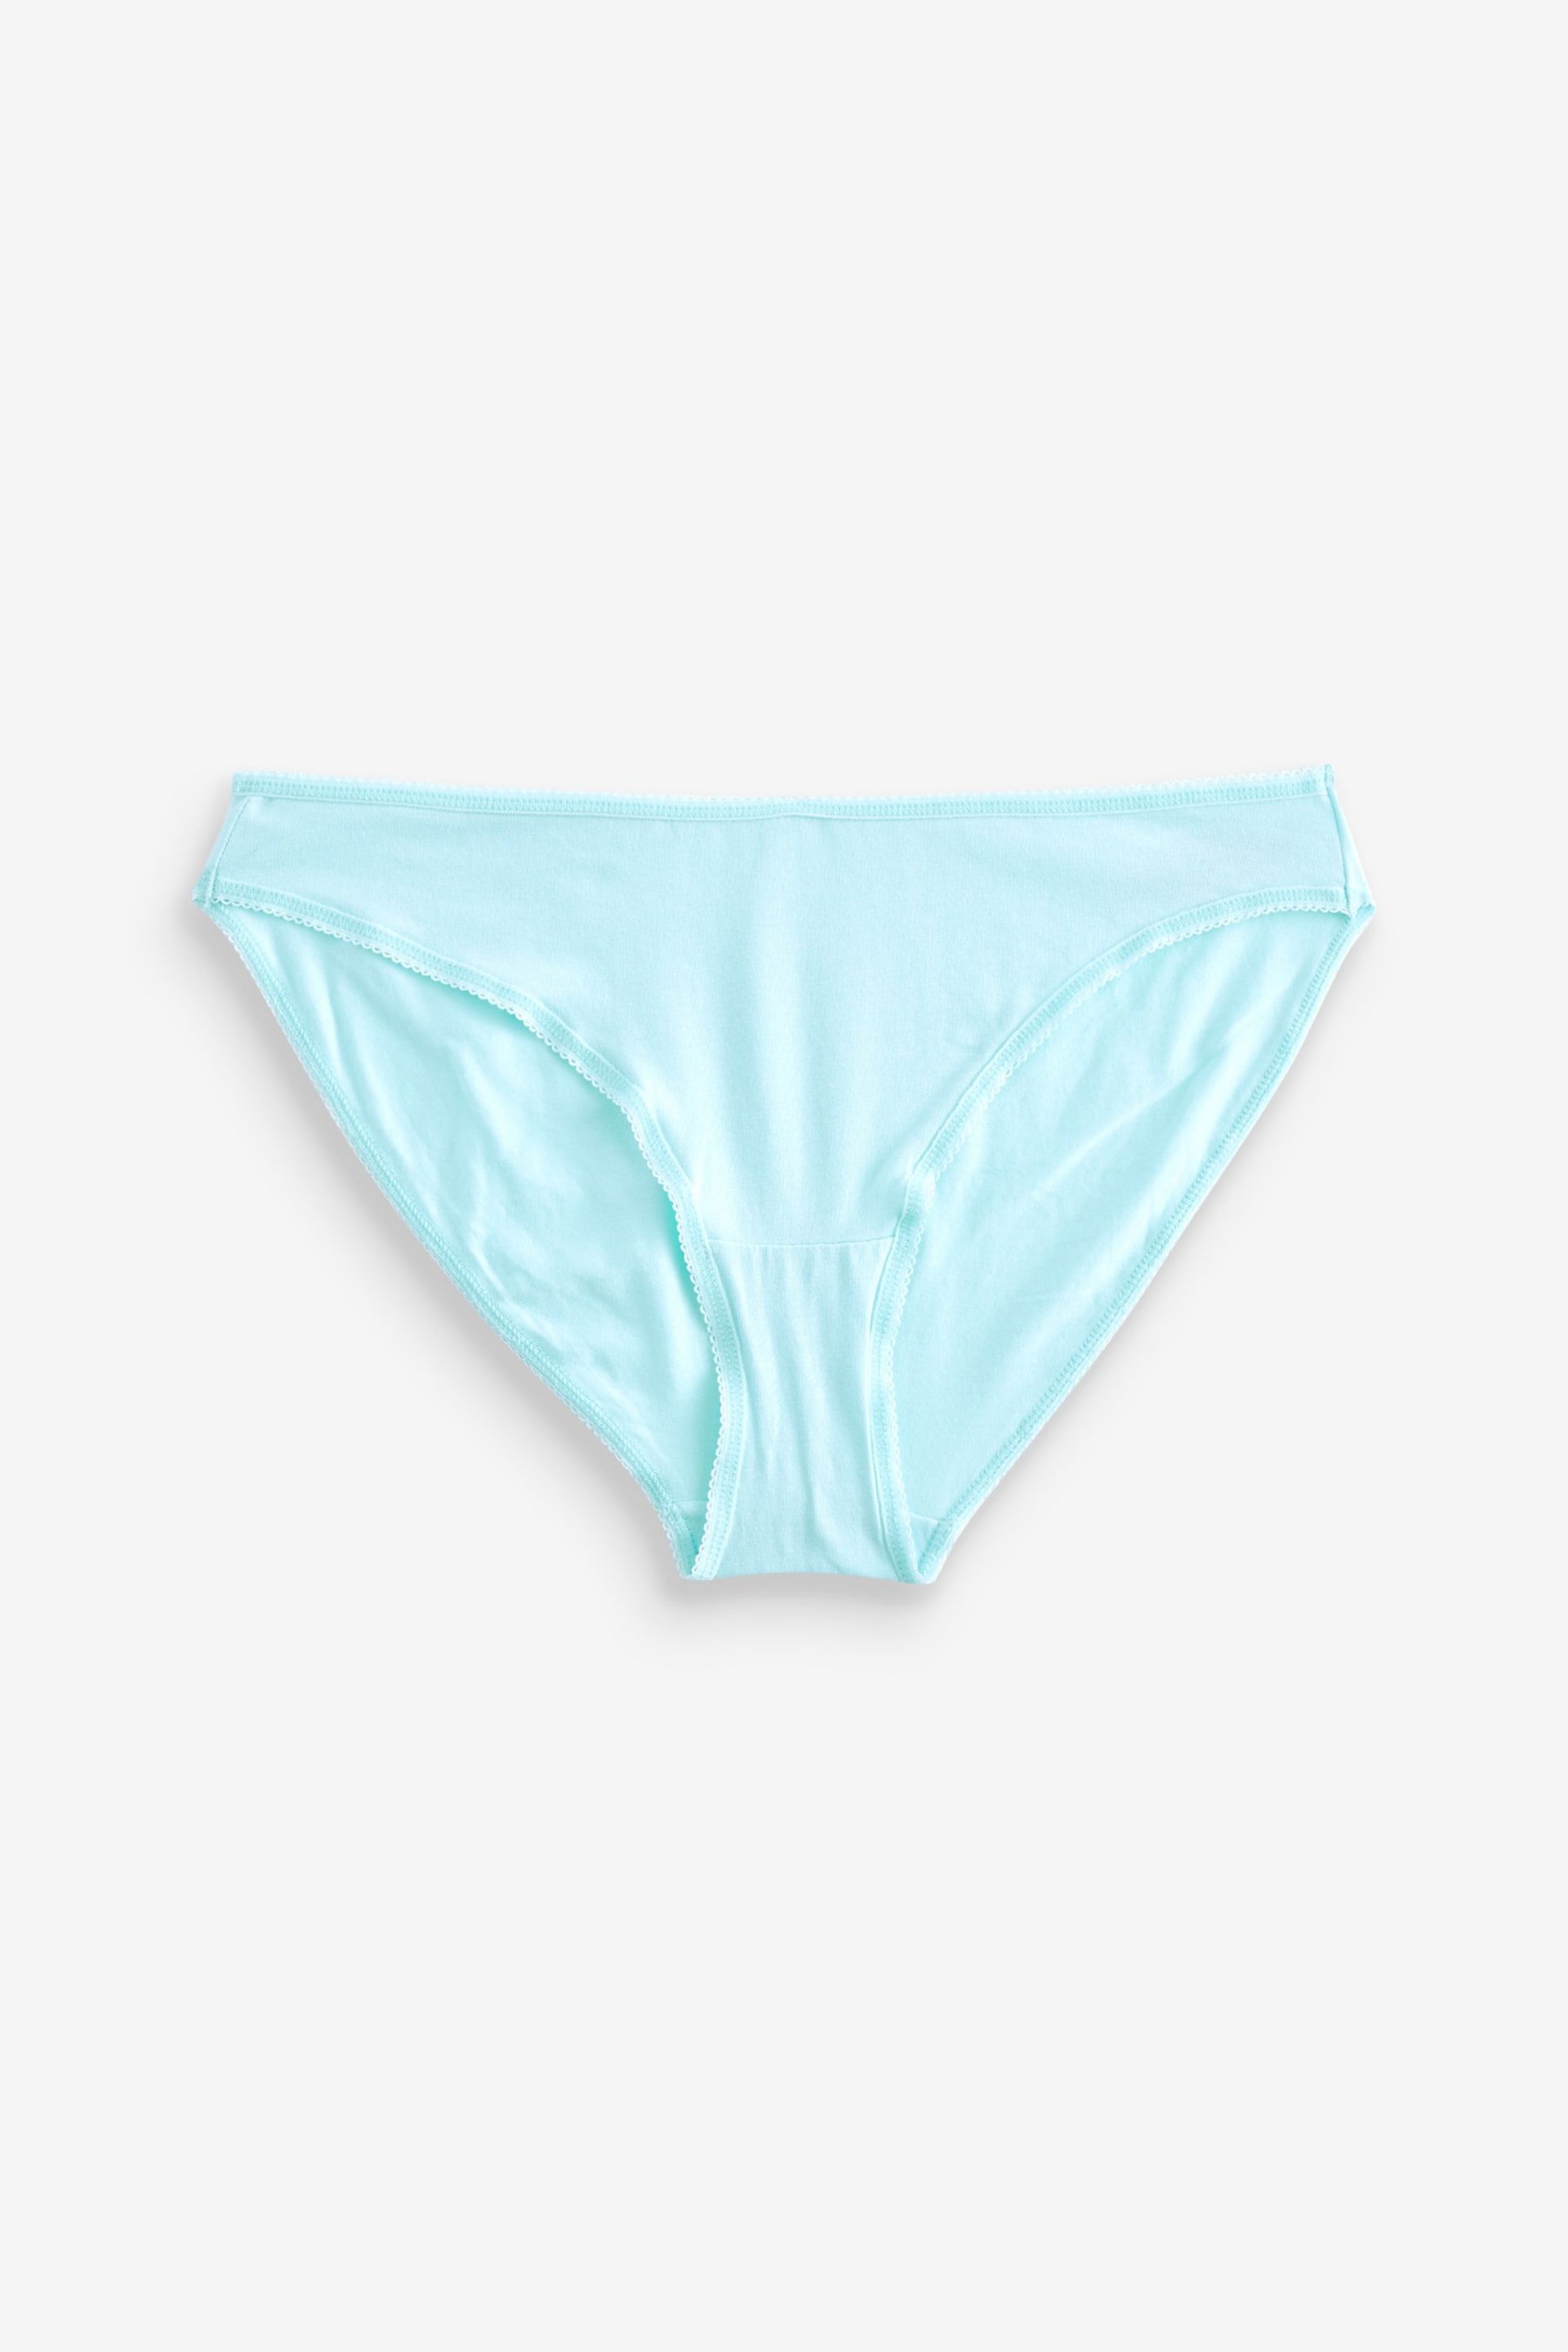 Pastel Colours High Leg Cotton Rich Knickers 6 Pack - Image 7 of 10